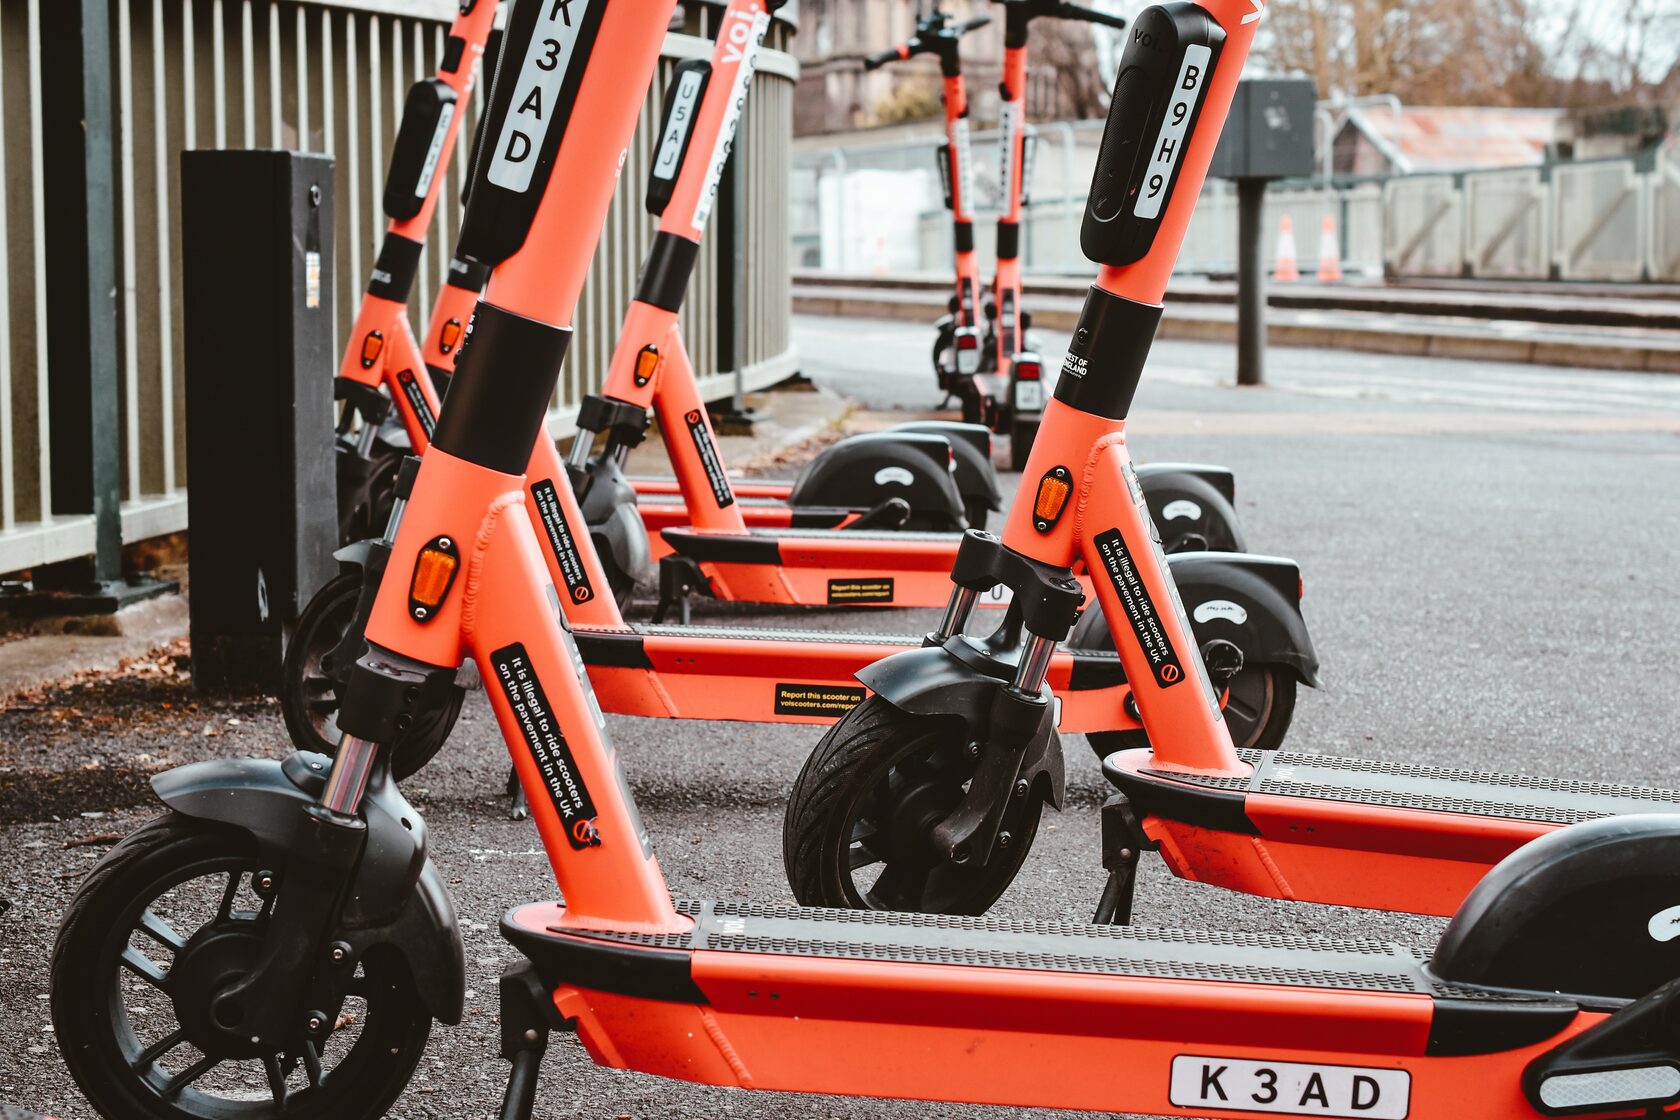 Scooters for sharing business